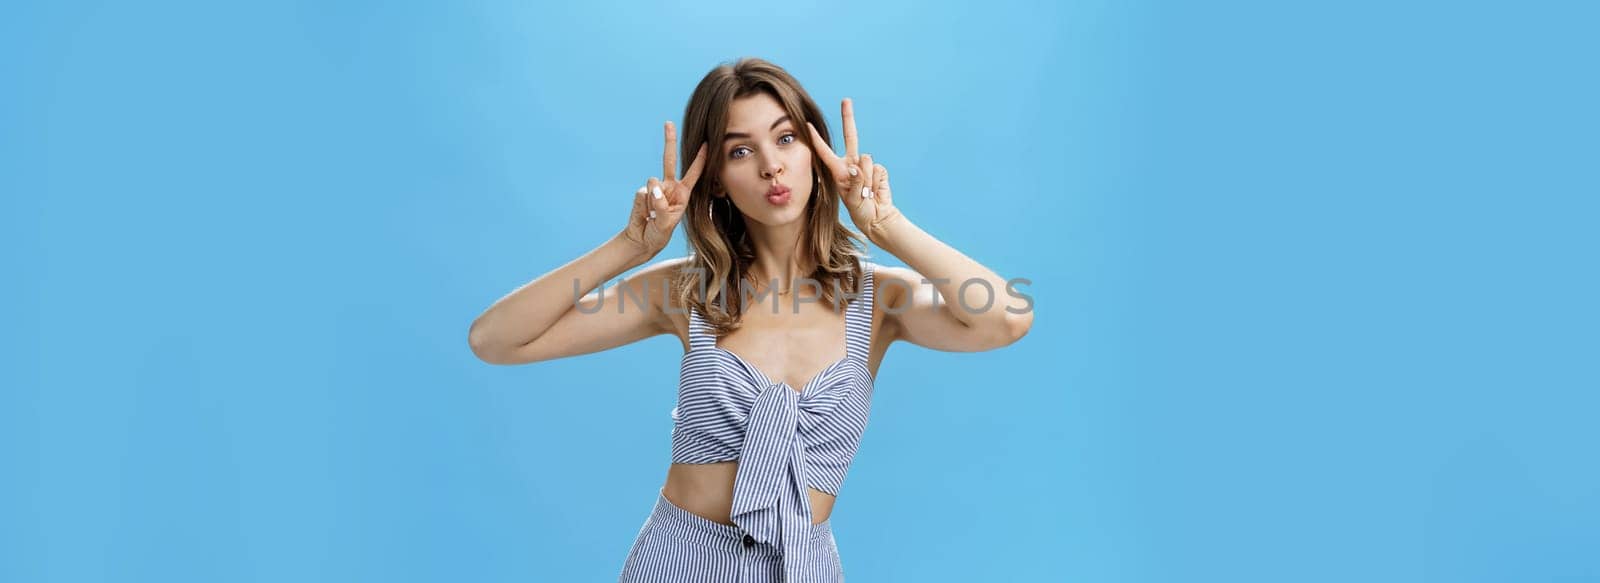 Charming cute unretouched woman with chestnut hair and tattoo showing peace gestures near face folding lips in mwah making silly face while posing over blue background confident and carefree. Emotions and body language concept